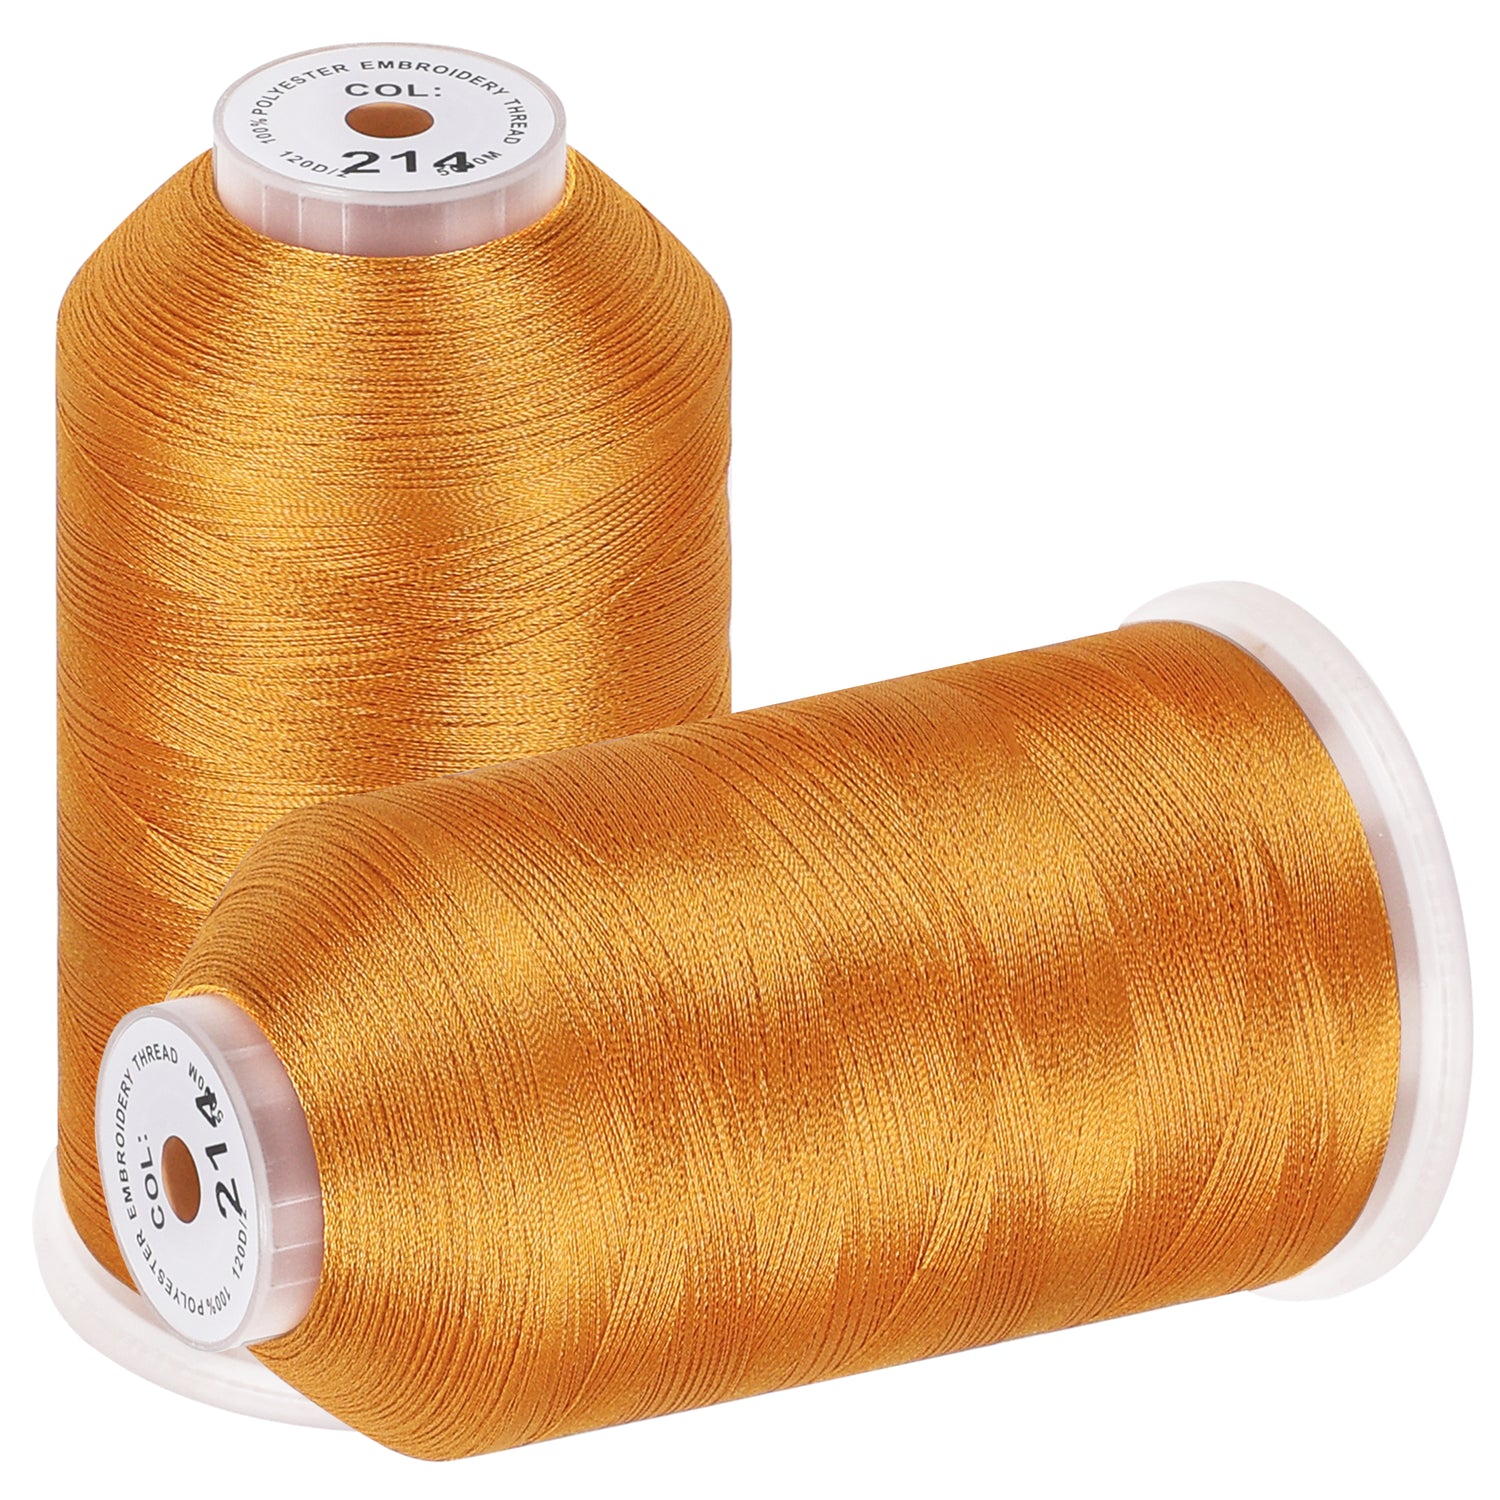 2 Spools of 5000M Embroidery Thread – Smartstitch